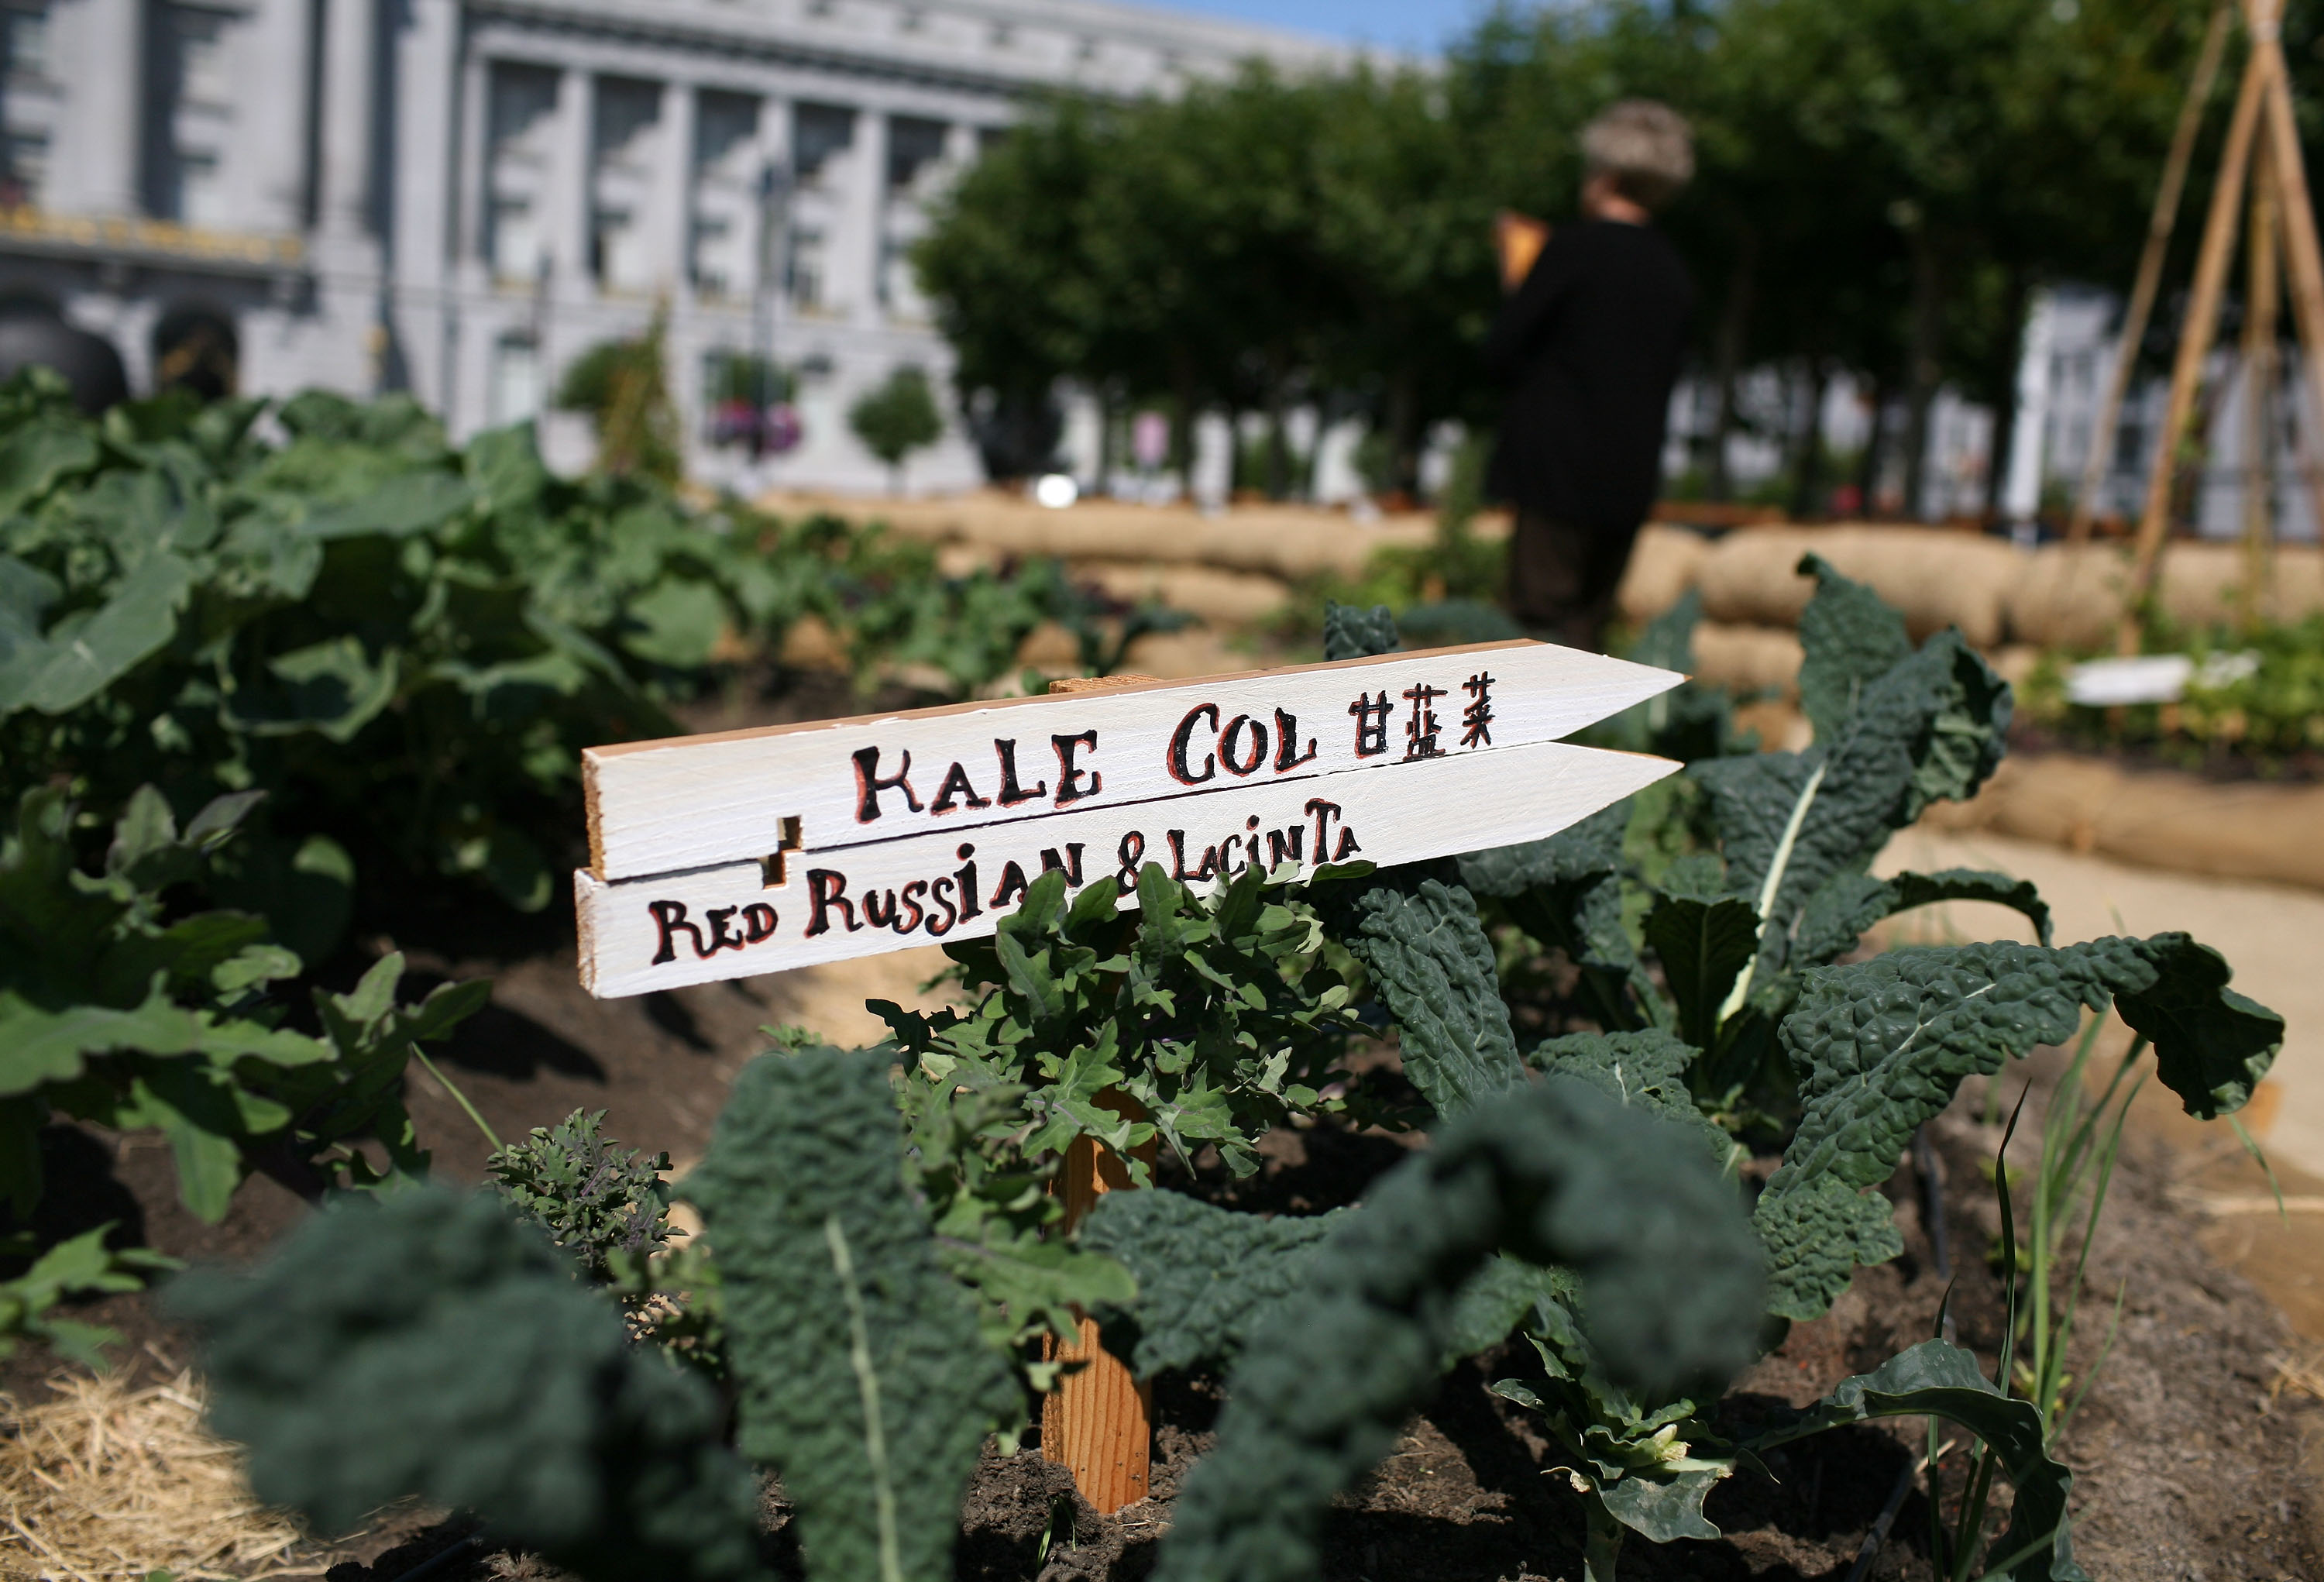 Kale’s extreme popularity leads to worldwide shortage